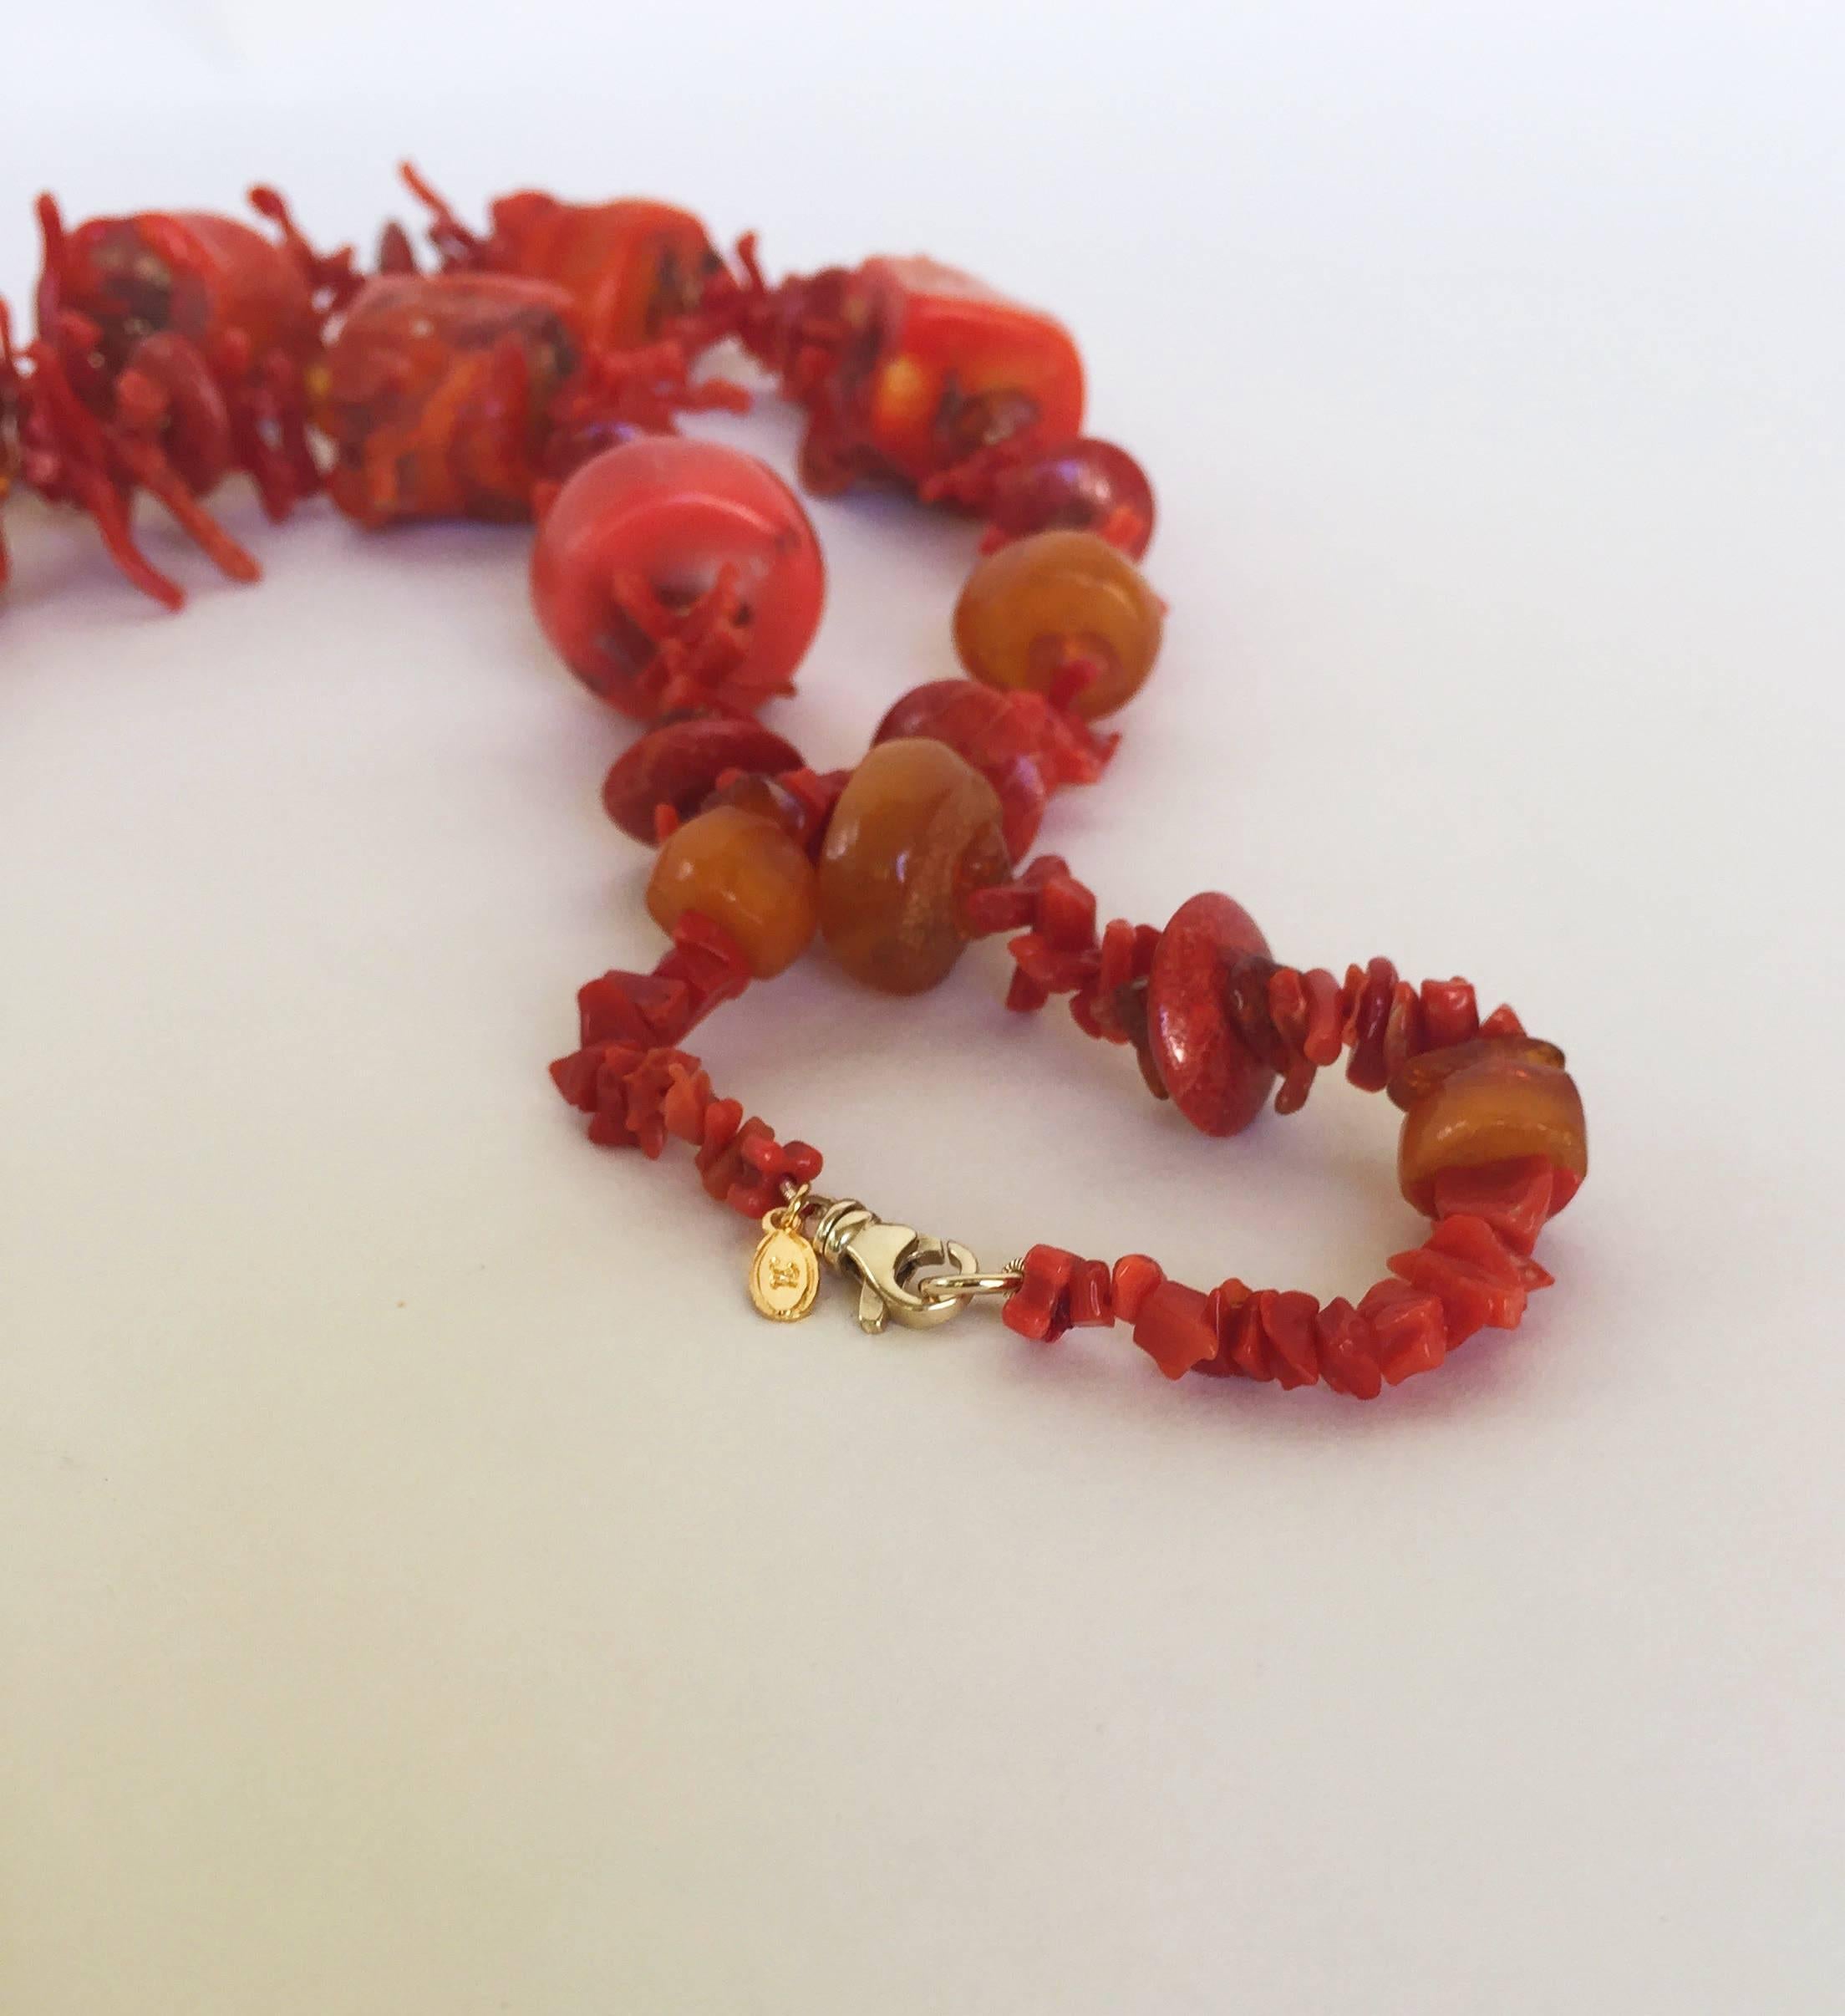 Women's Coral and Amber Beaded Necklace by Marina J